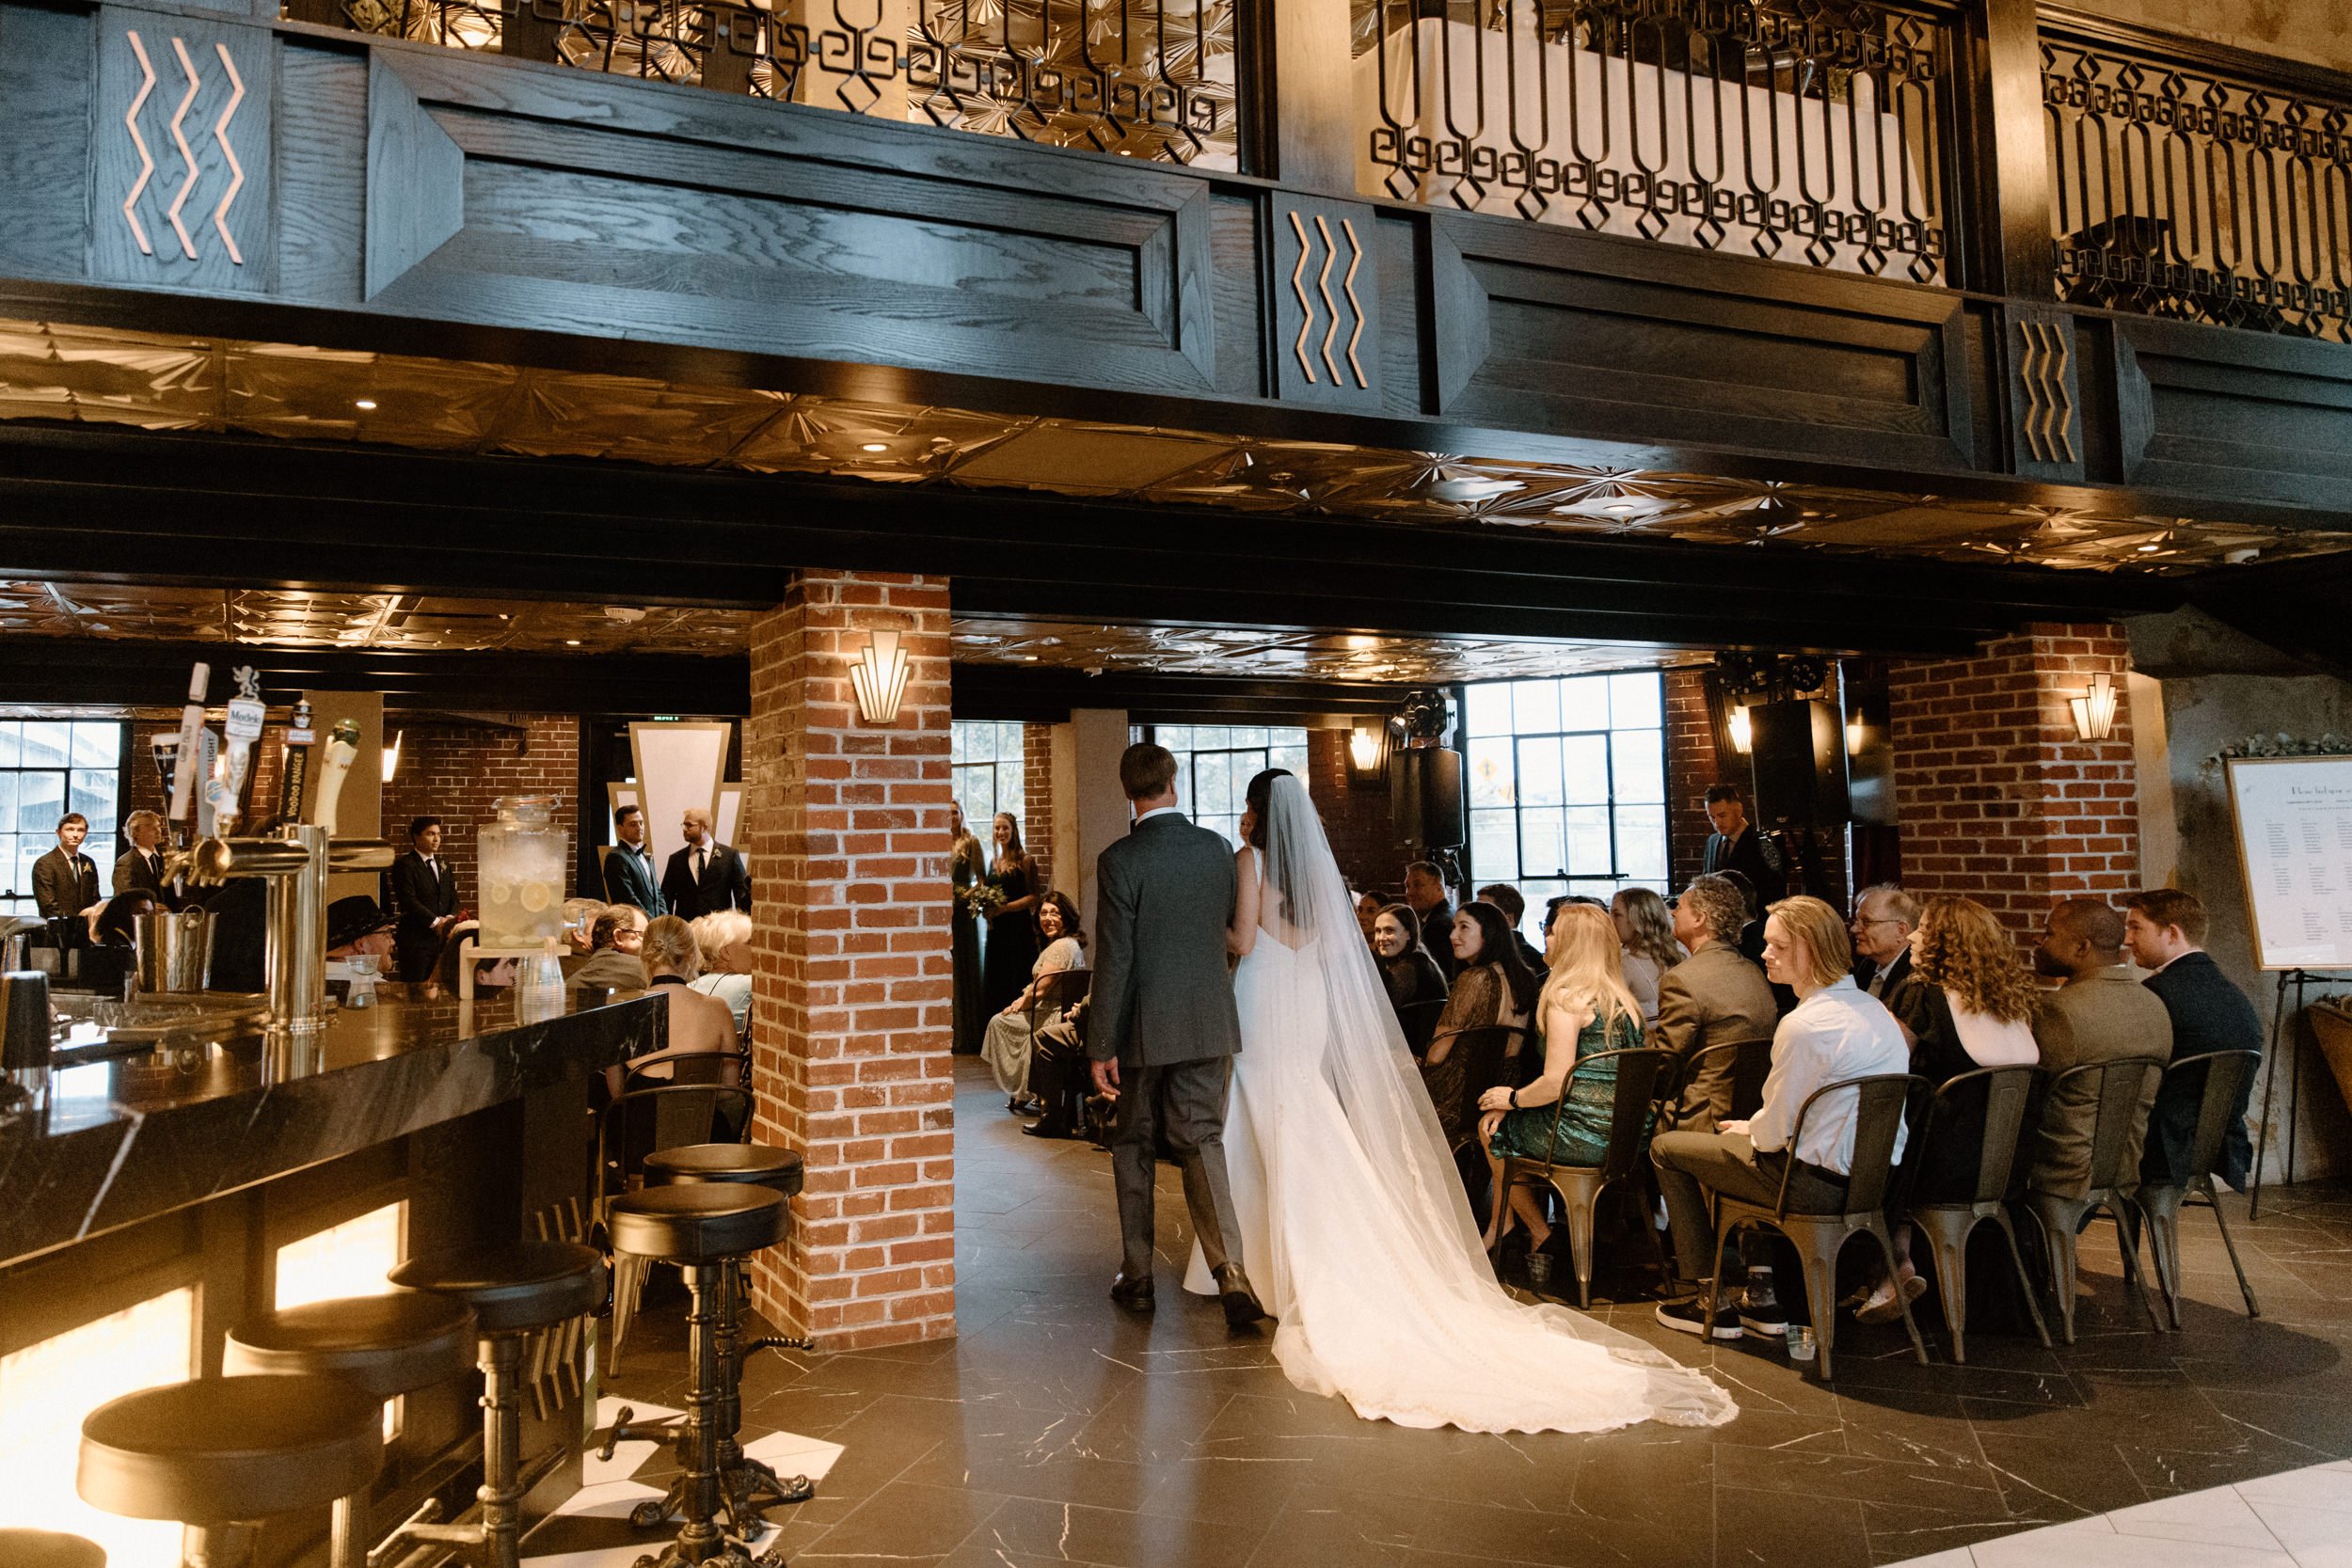 The bride and her father walk down the aisle at Ironworks in Denver, CO